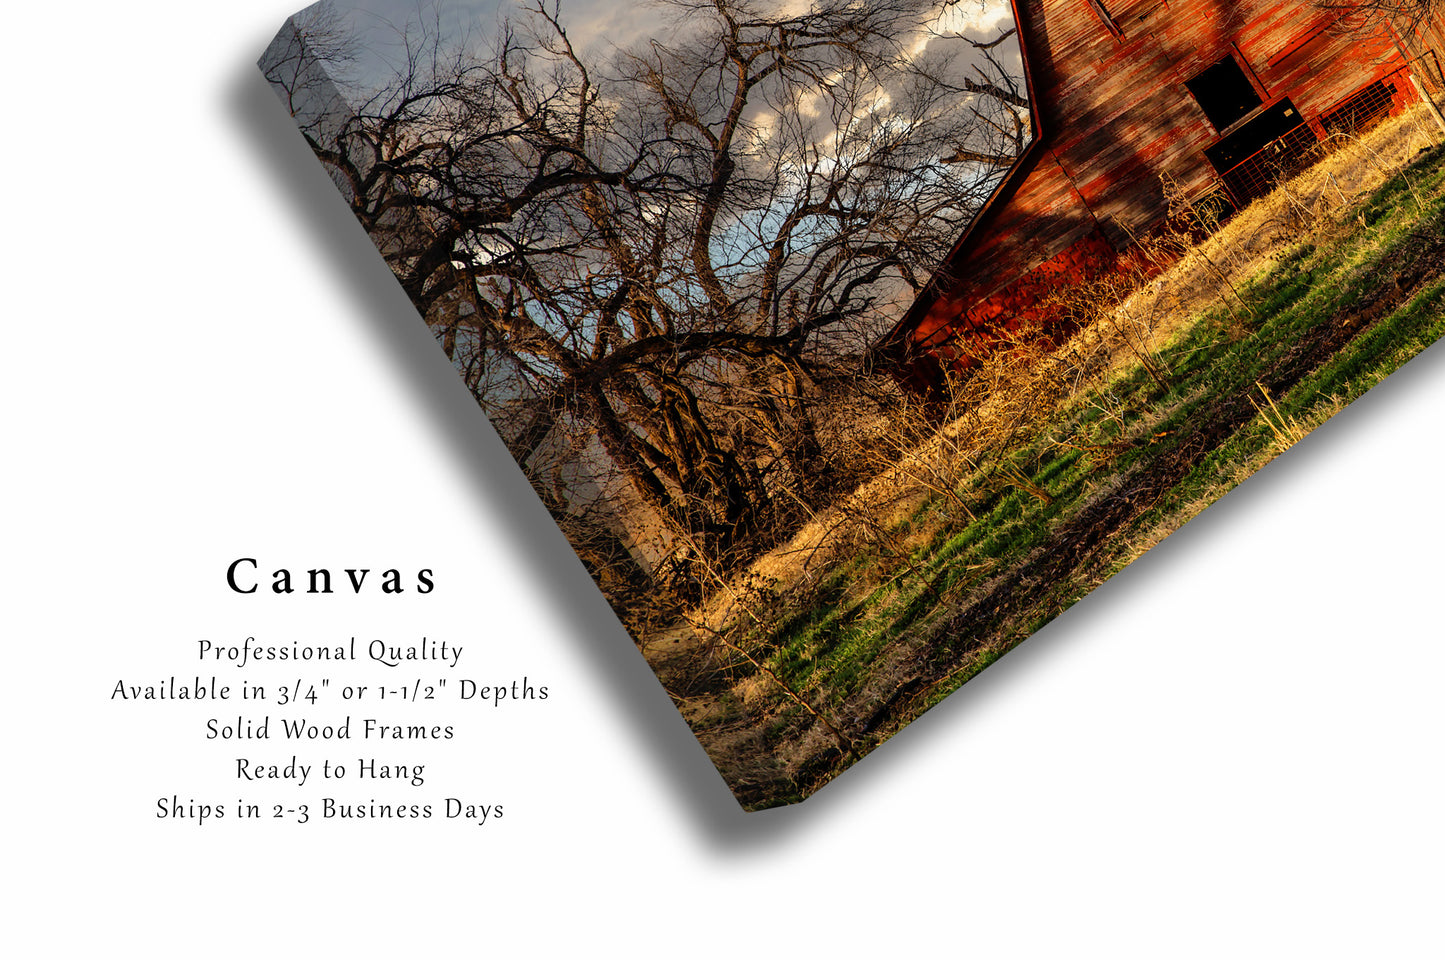 Country Canvas Wall Art (Ready to Hang) Gallery Wrap of Rustic Red Barn in Shadows of Leafless Trees in Oklahoma Farm Photography Farmhouse Decor